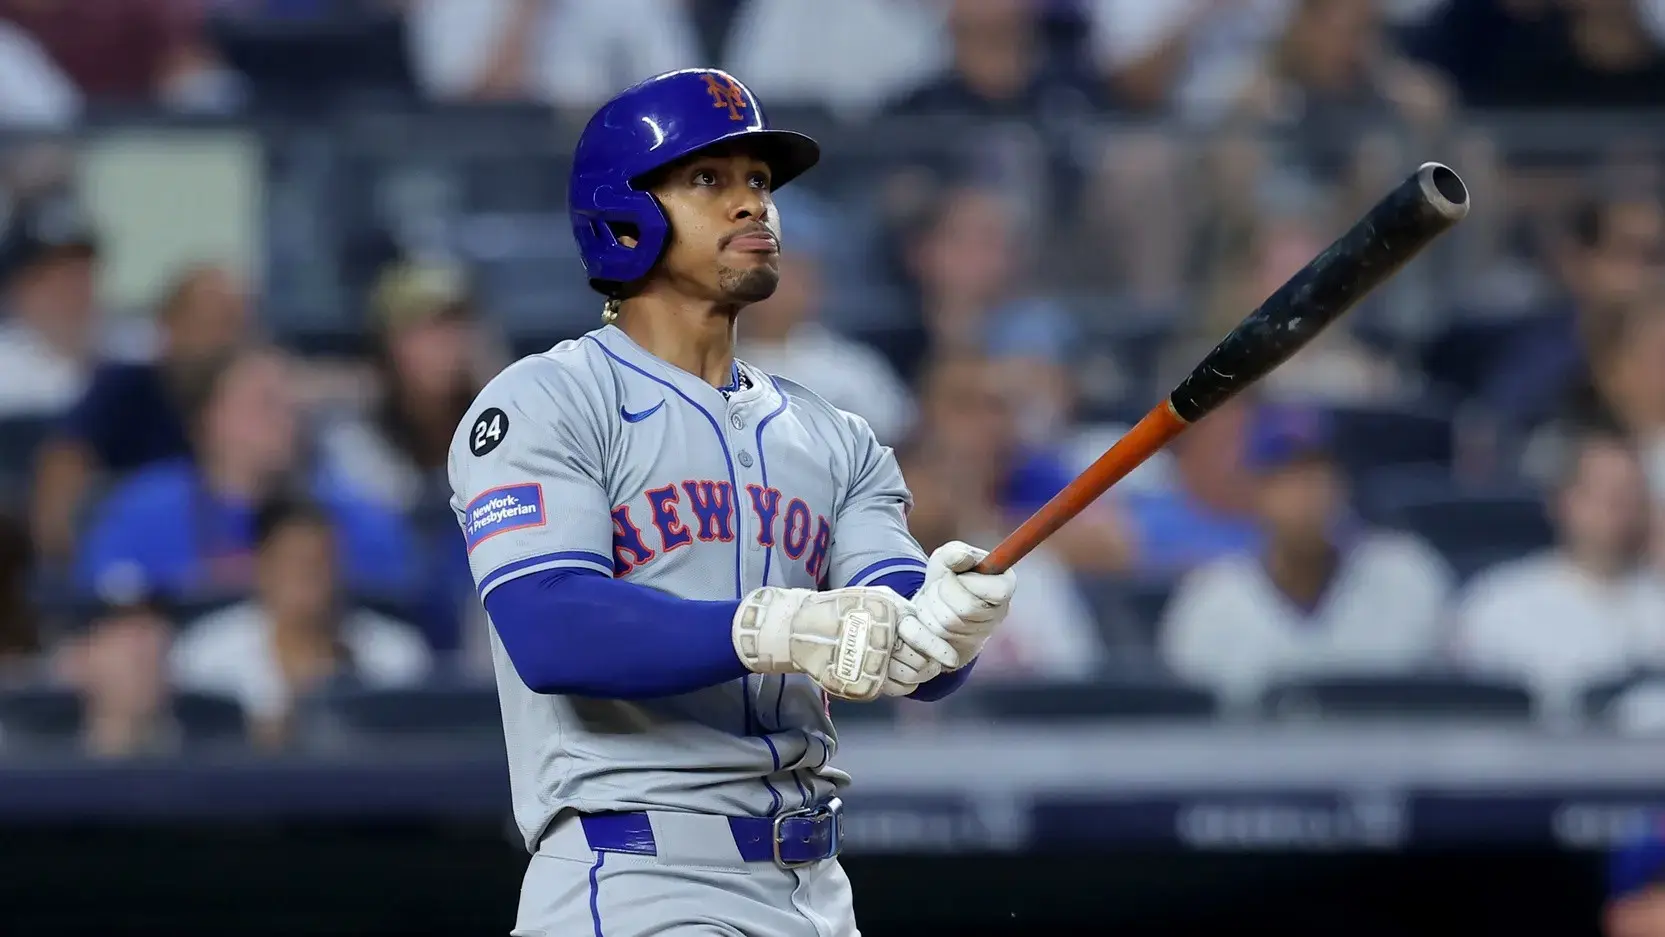 New York Mets shortstop Francisco Lindor (12) watches his two run home run against the New York Yankees during the fifth inning at Yankee Stadium.